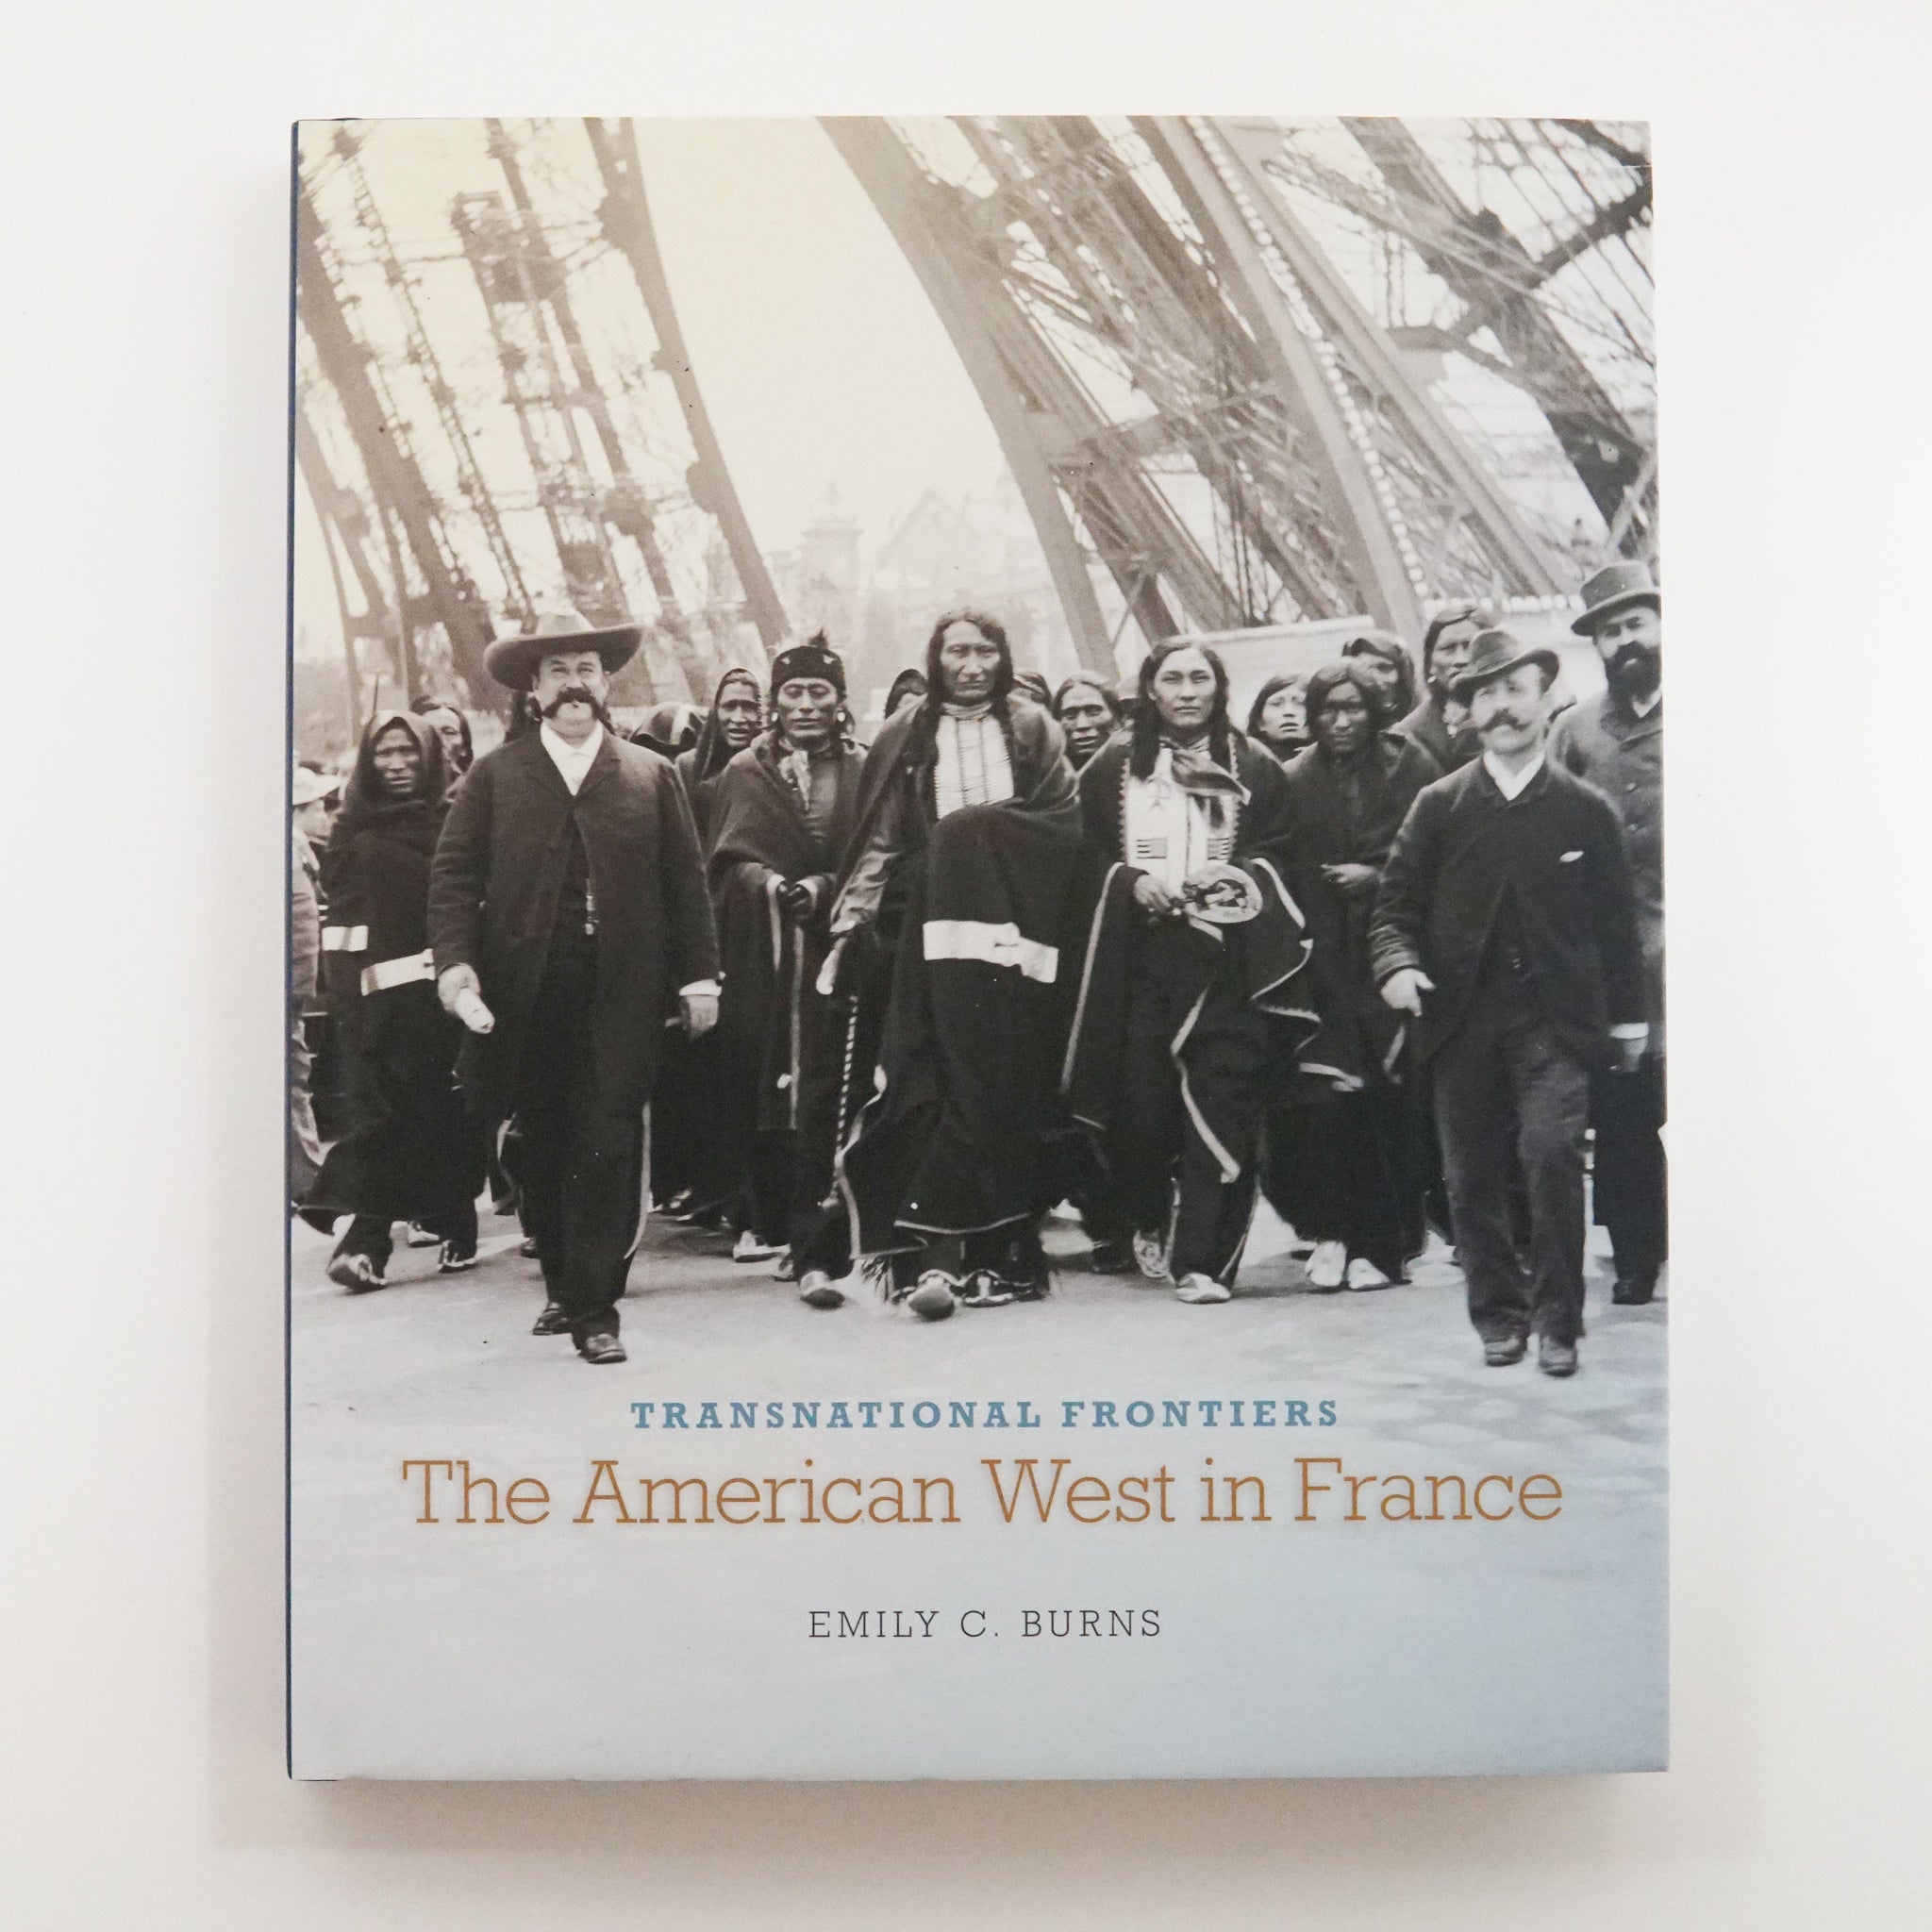 BK 14 TRANSNATIONAL FRONTIERS - THE AMERICAN WEST IN FRANCE BY EMILY C. BURNS #21046981 OCT22